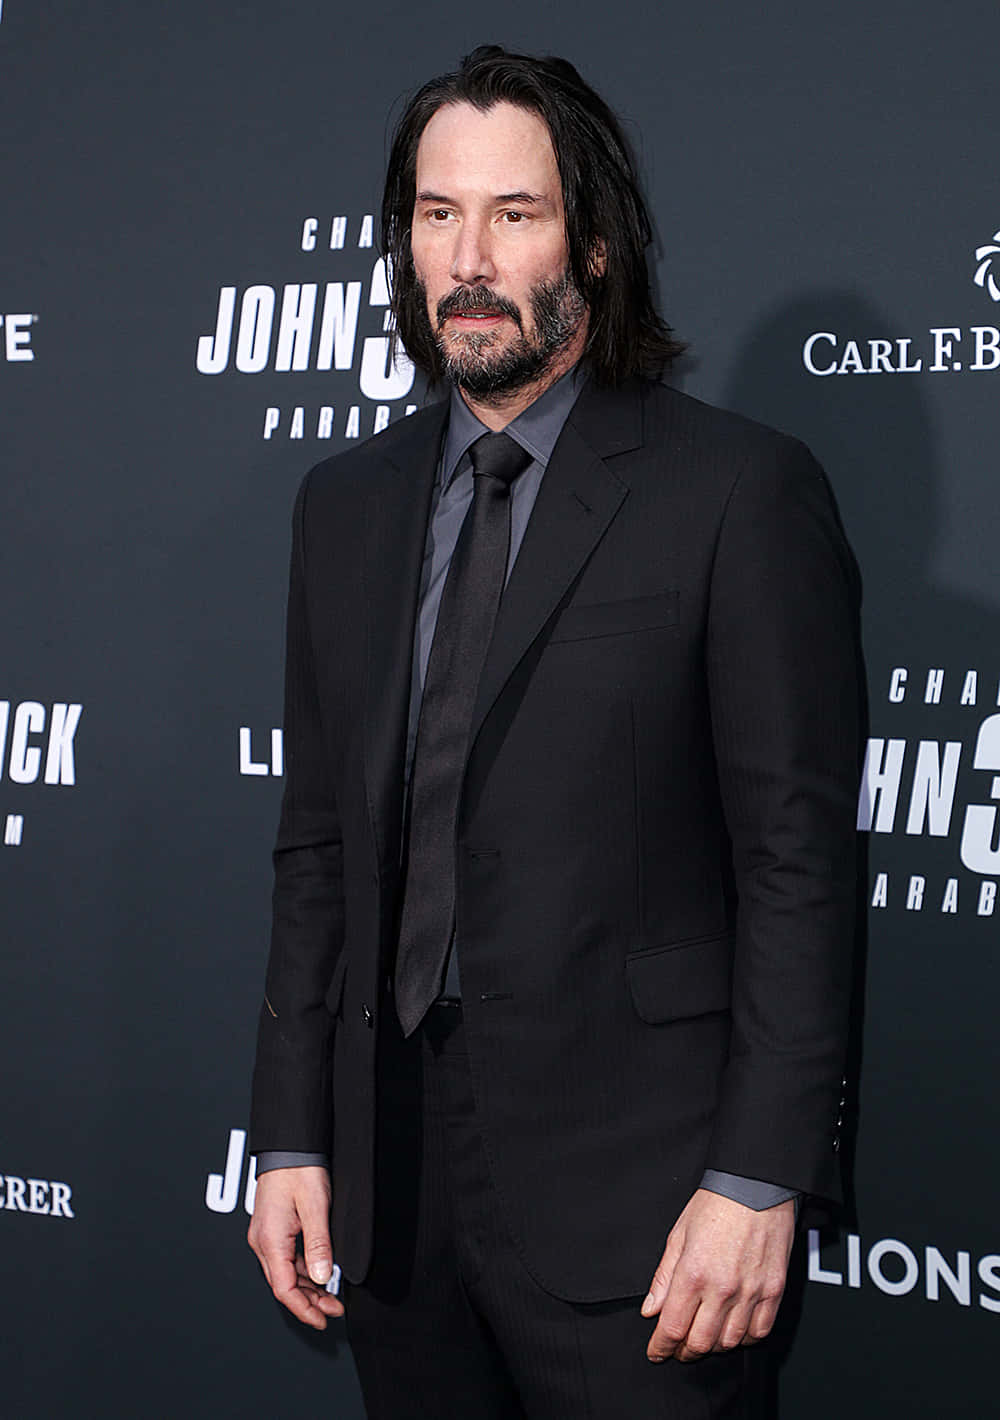 Keanu Reeves exudes charm and style in an elegant suit